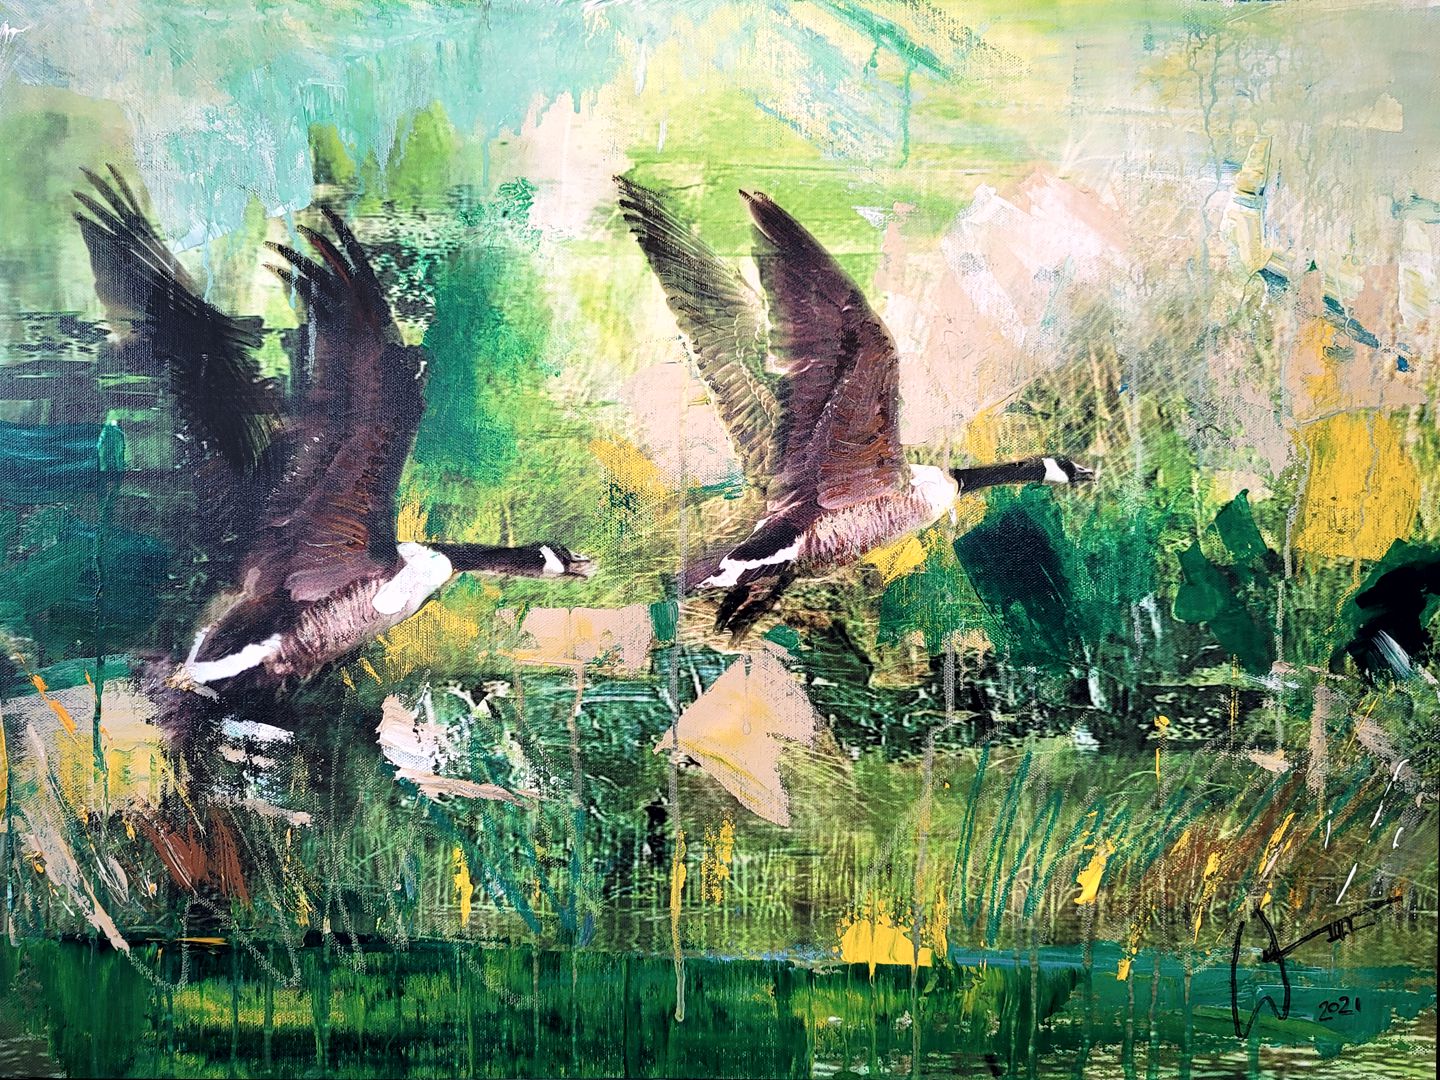 Canadian Geese painting by artist, William III